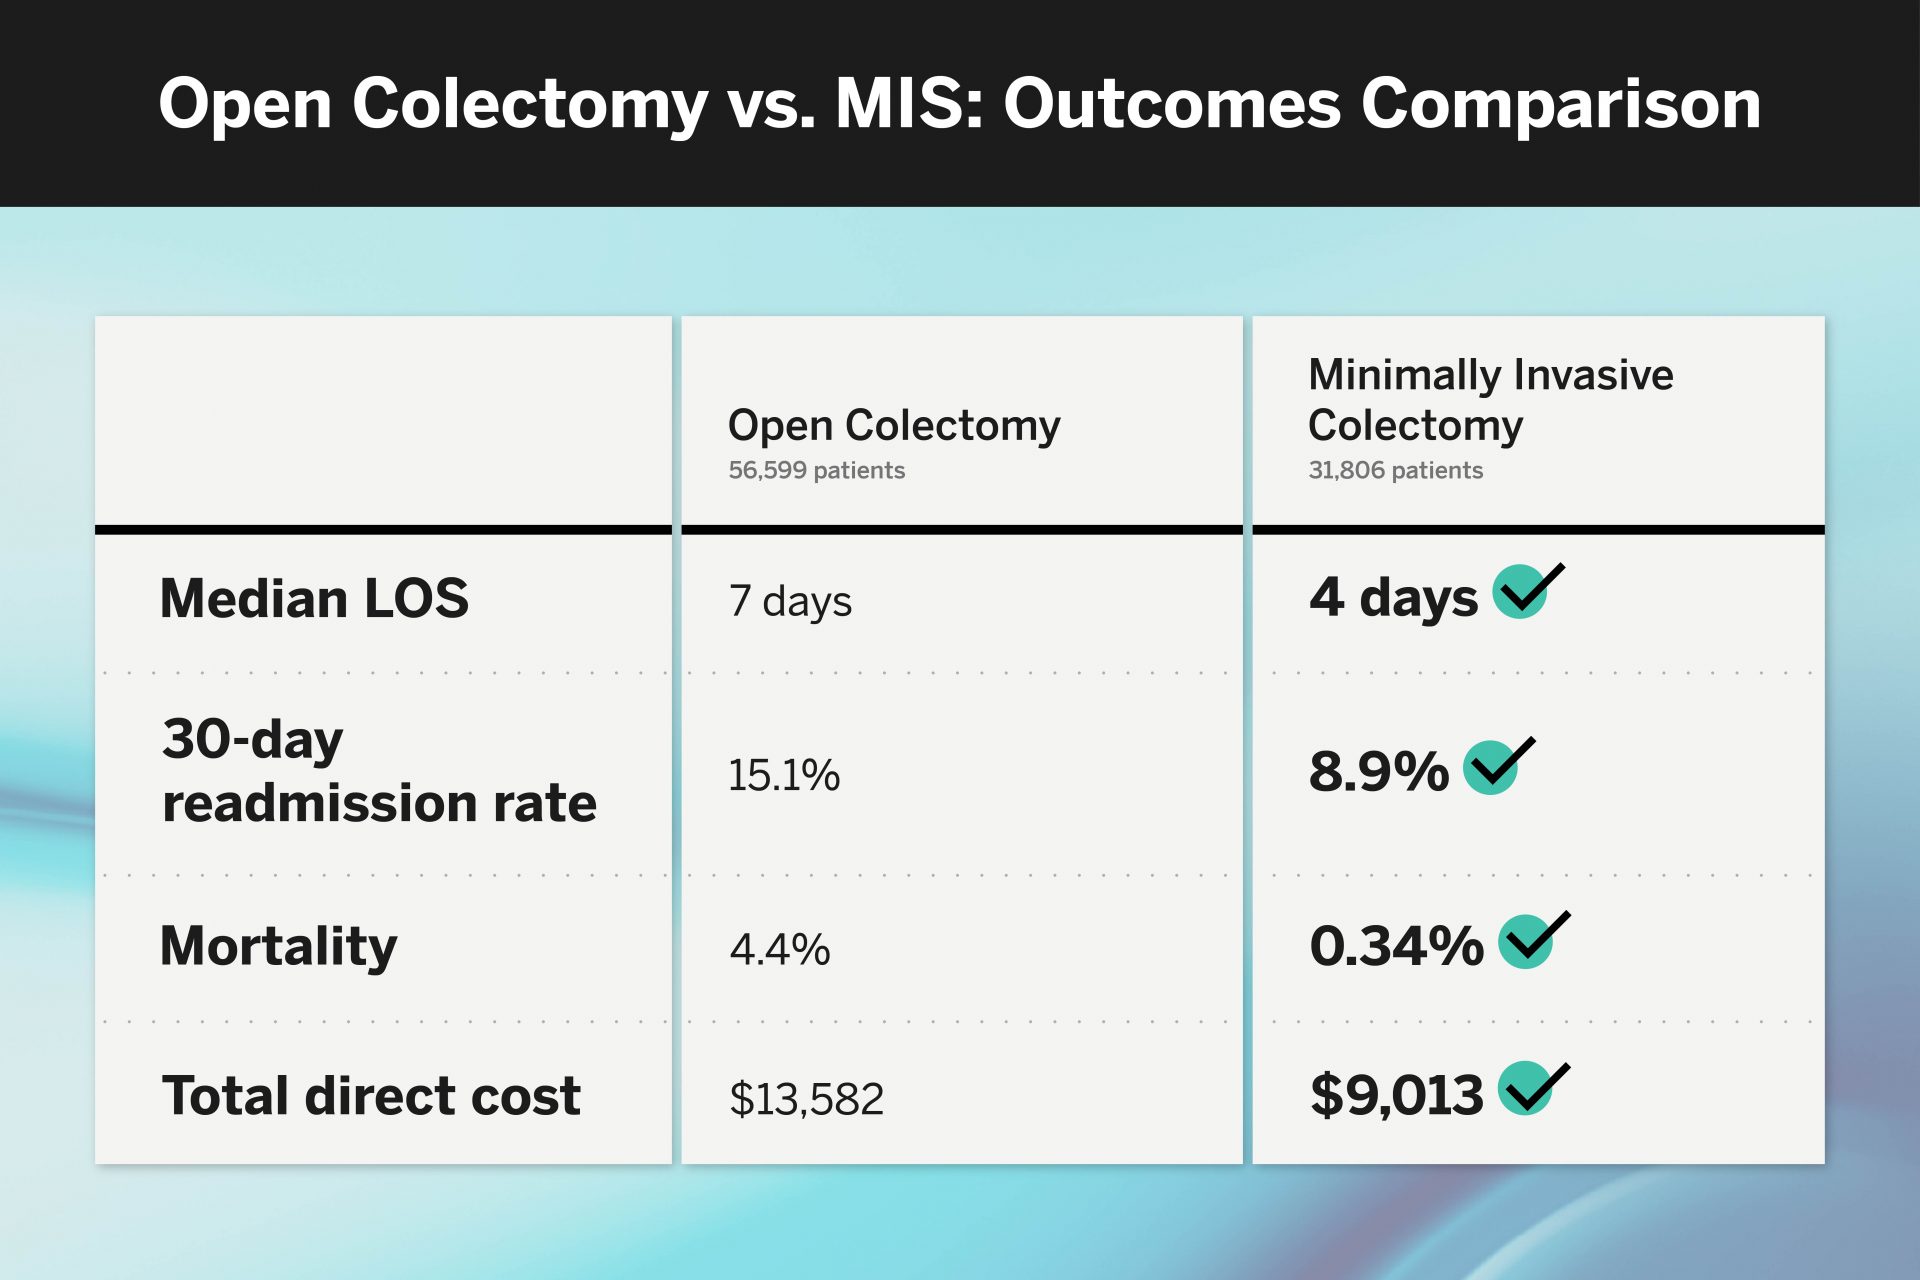 Compared to open approach, minimally invasive surgery is associated with reductions in length of stay, readmission rate, mortality, cost.